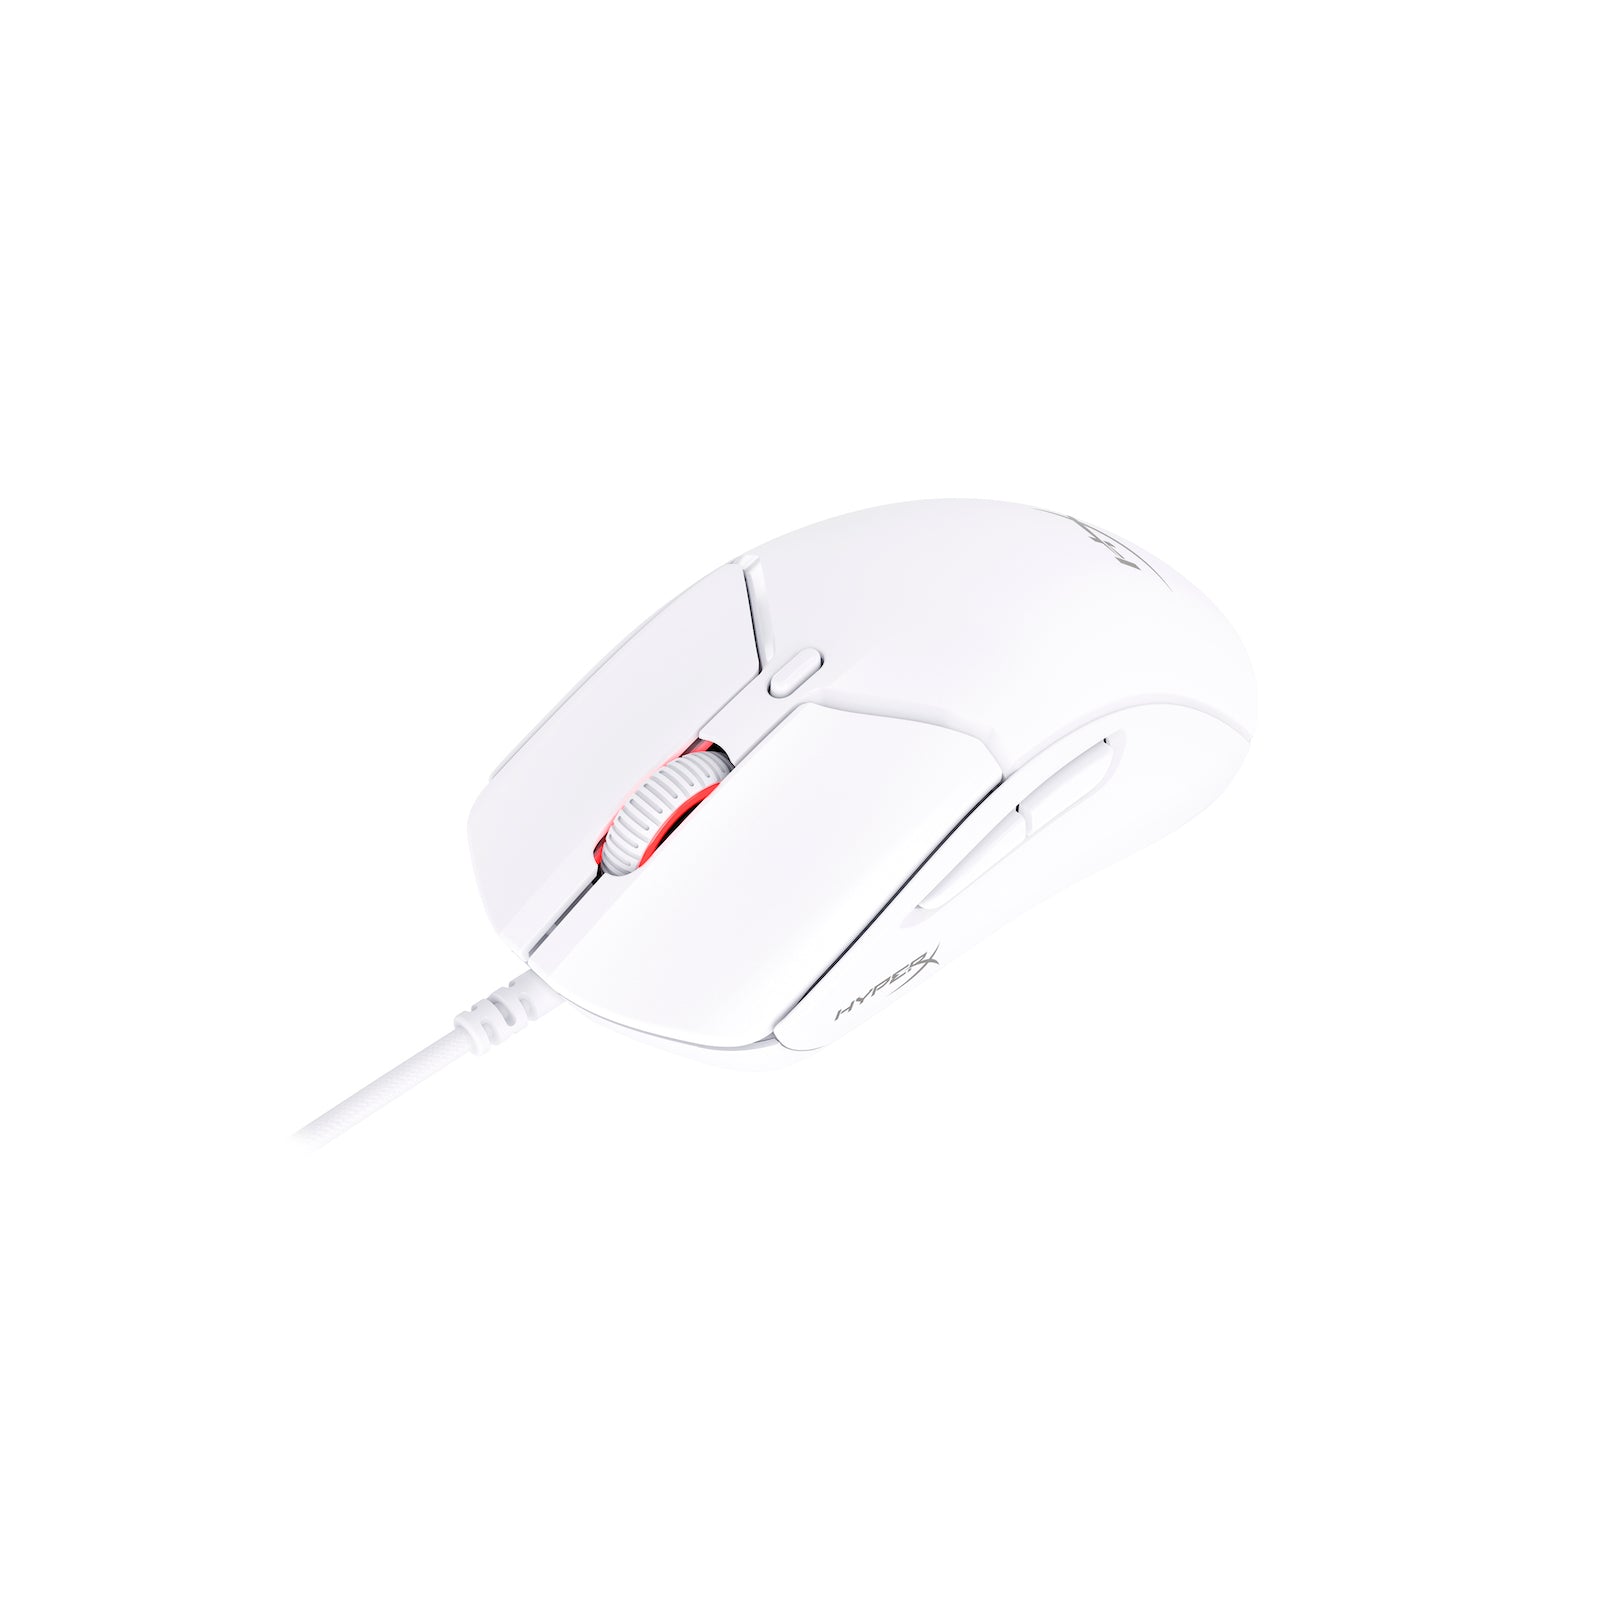 HyperX Mouse | 2 Haste Gaming Pulsefire